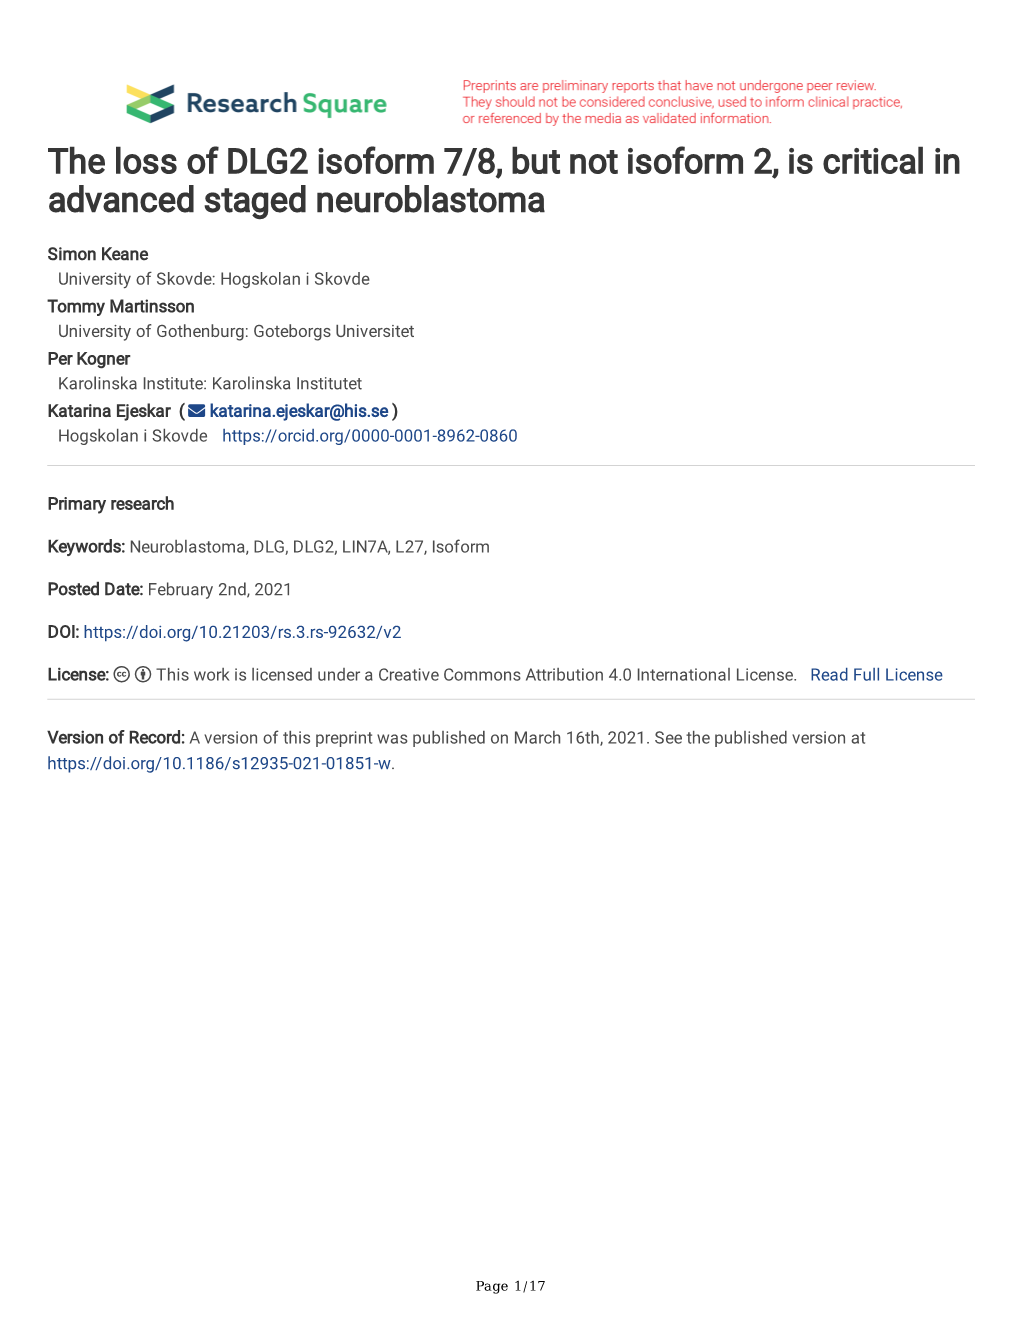 The Loss of DLG2 Isoform 7/8, but Not Isoform 2, Is Critical in Advanced Staged Neuroblastoma